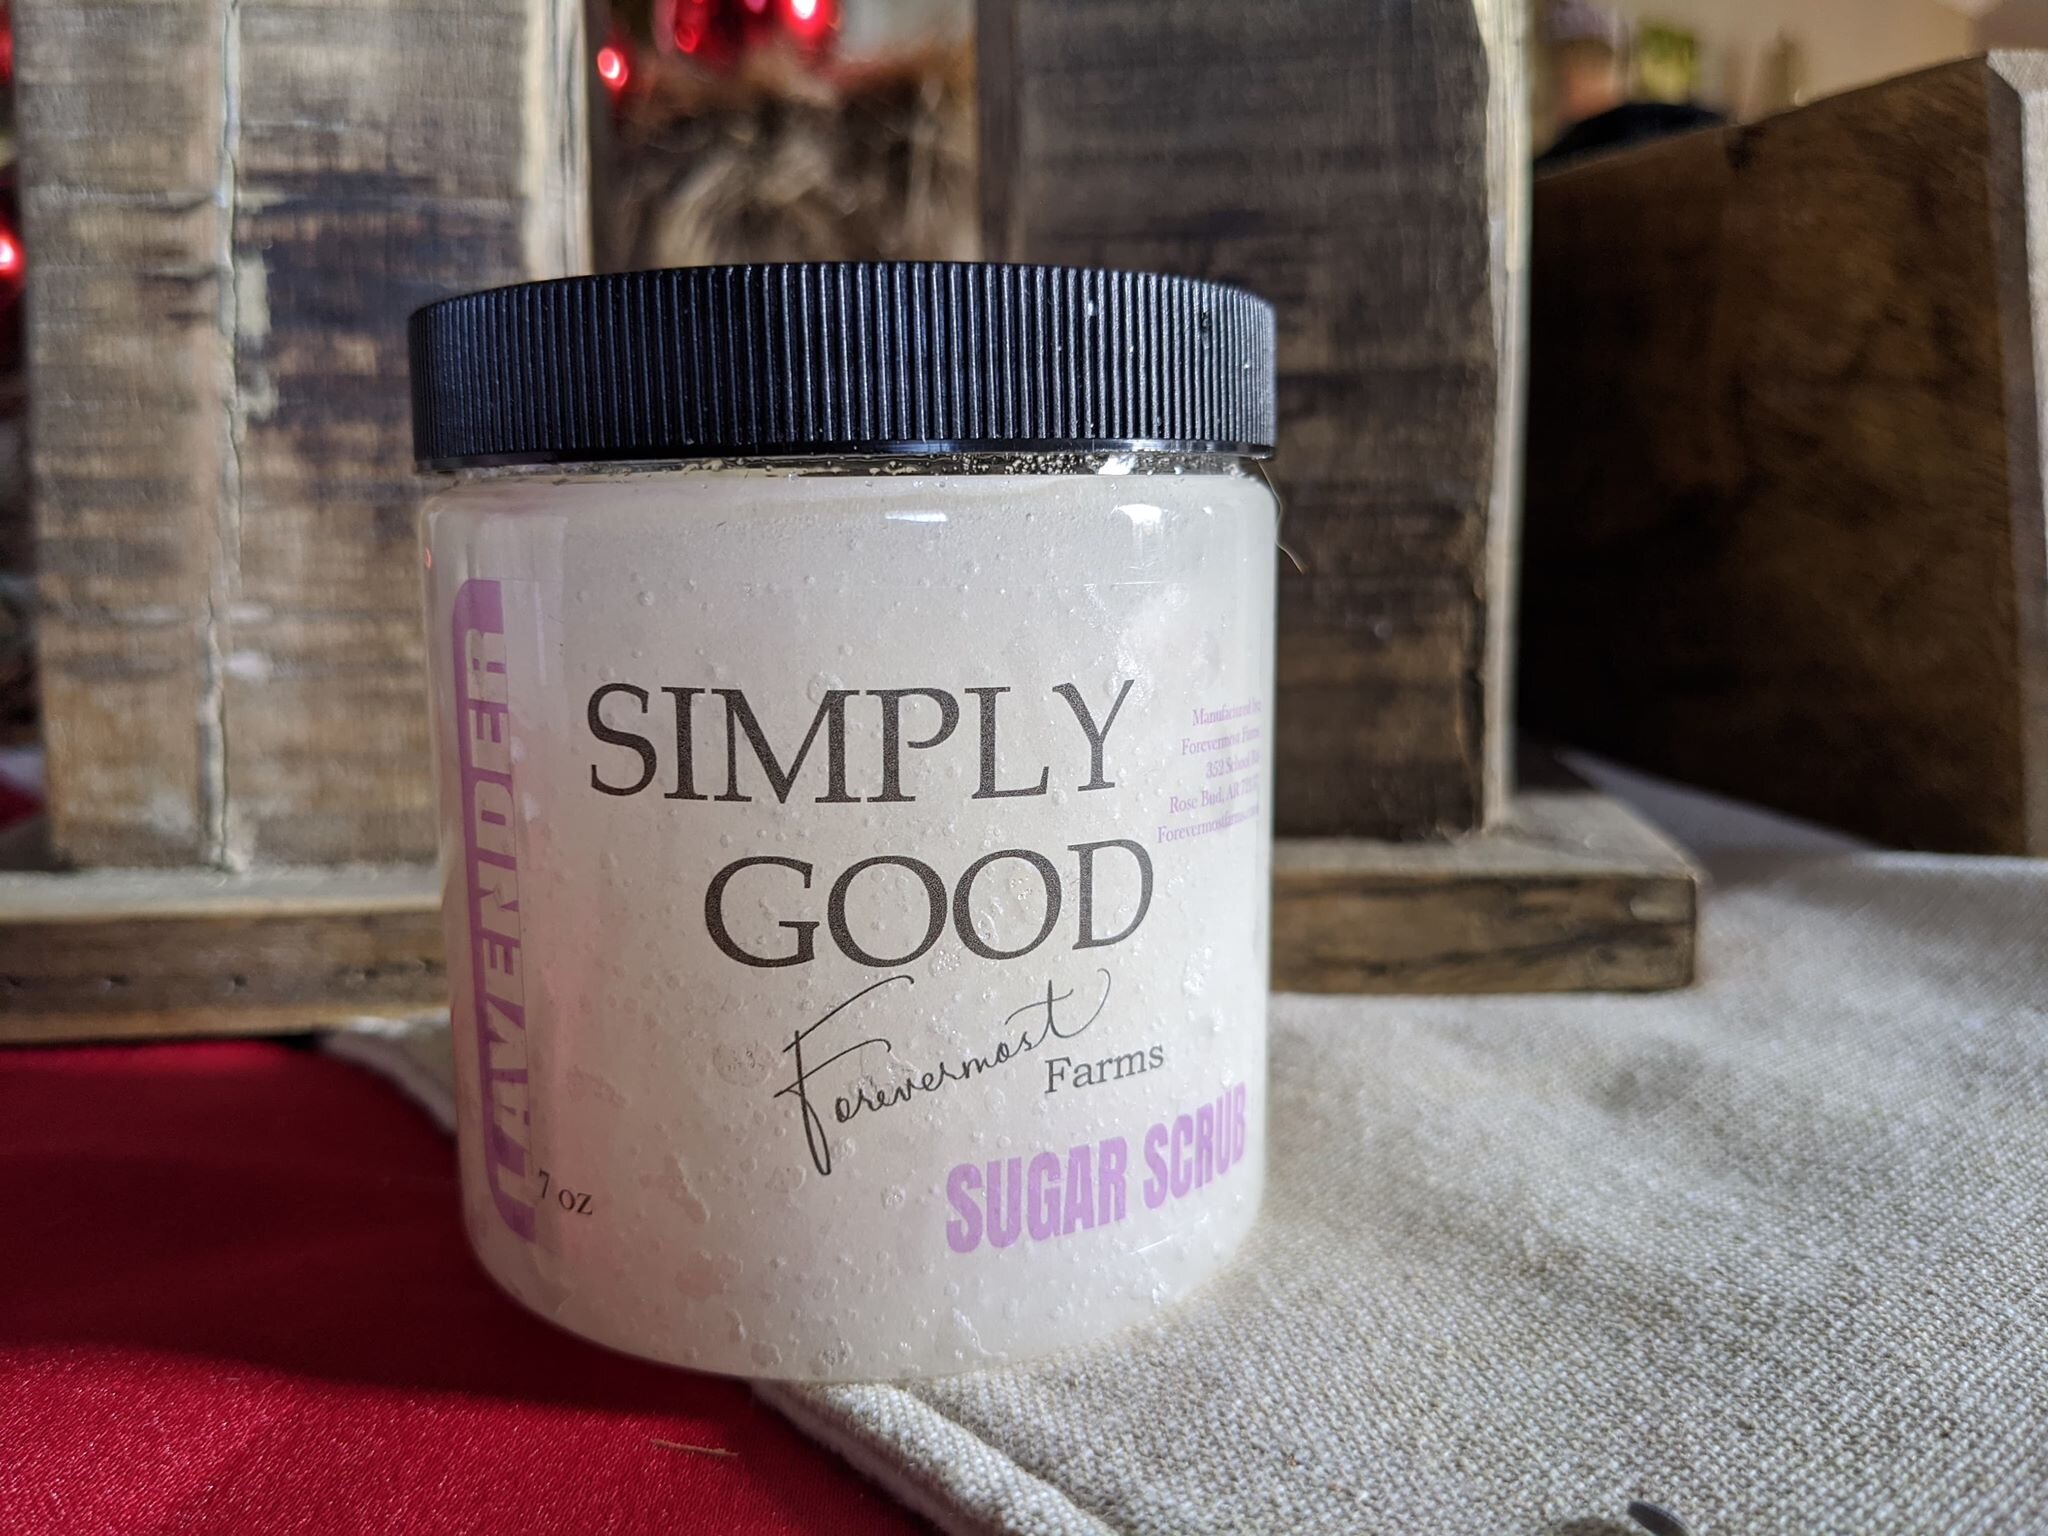 Lavender Sugar Scrub - The Simply Good Lavender Sugar Scrub is a sugar based shower/bath scrub that is infused with Lavender Essential Oils and massage oils that leave your skin clean and moisturized.